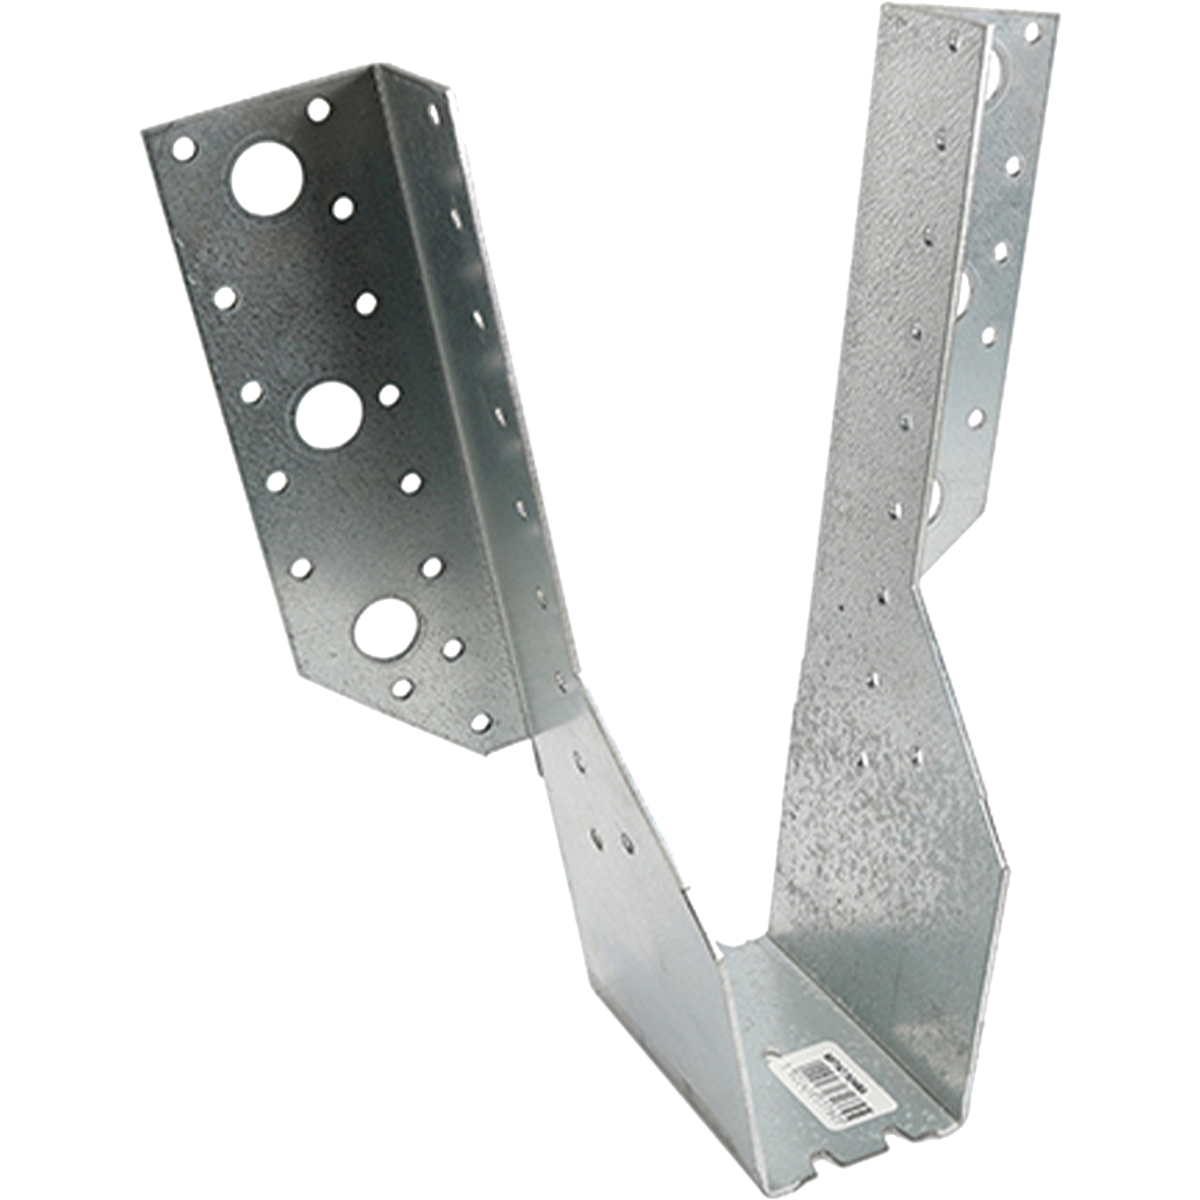 Corrosion resistant multi-functional timber hangers for use in the construction industry.